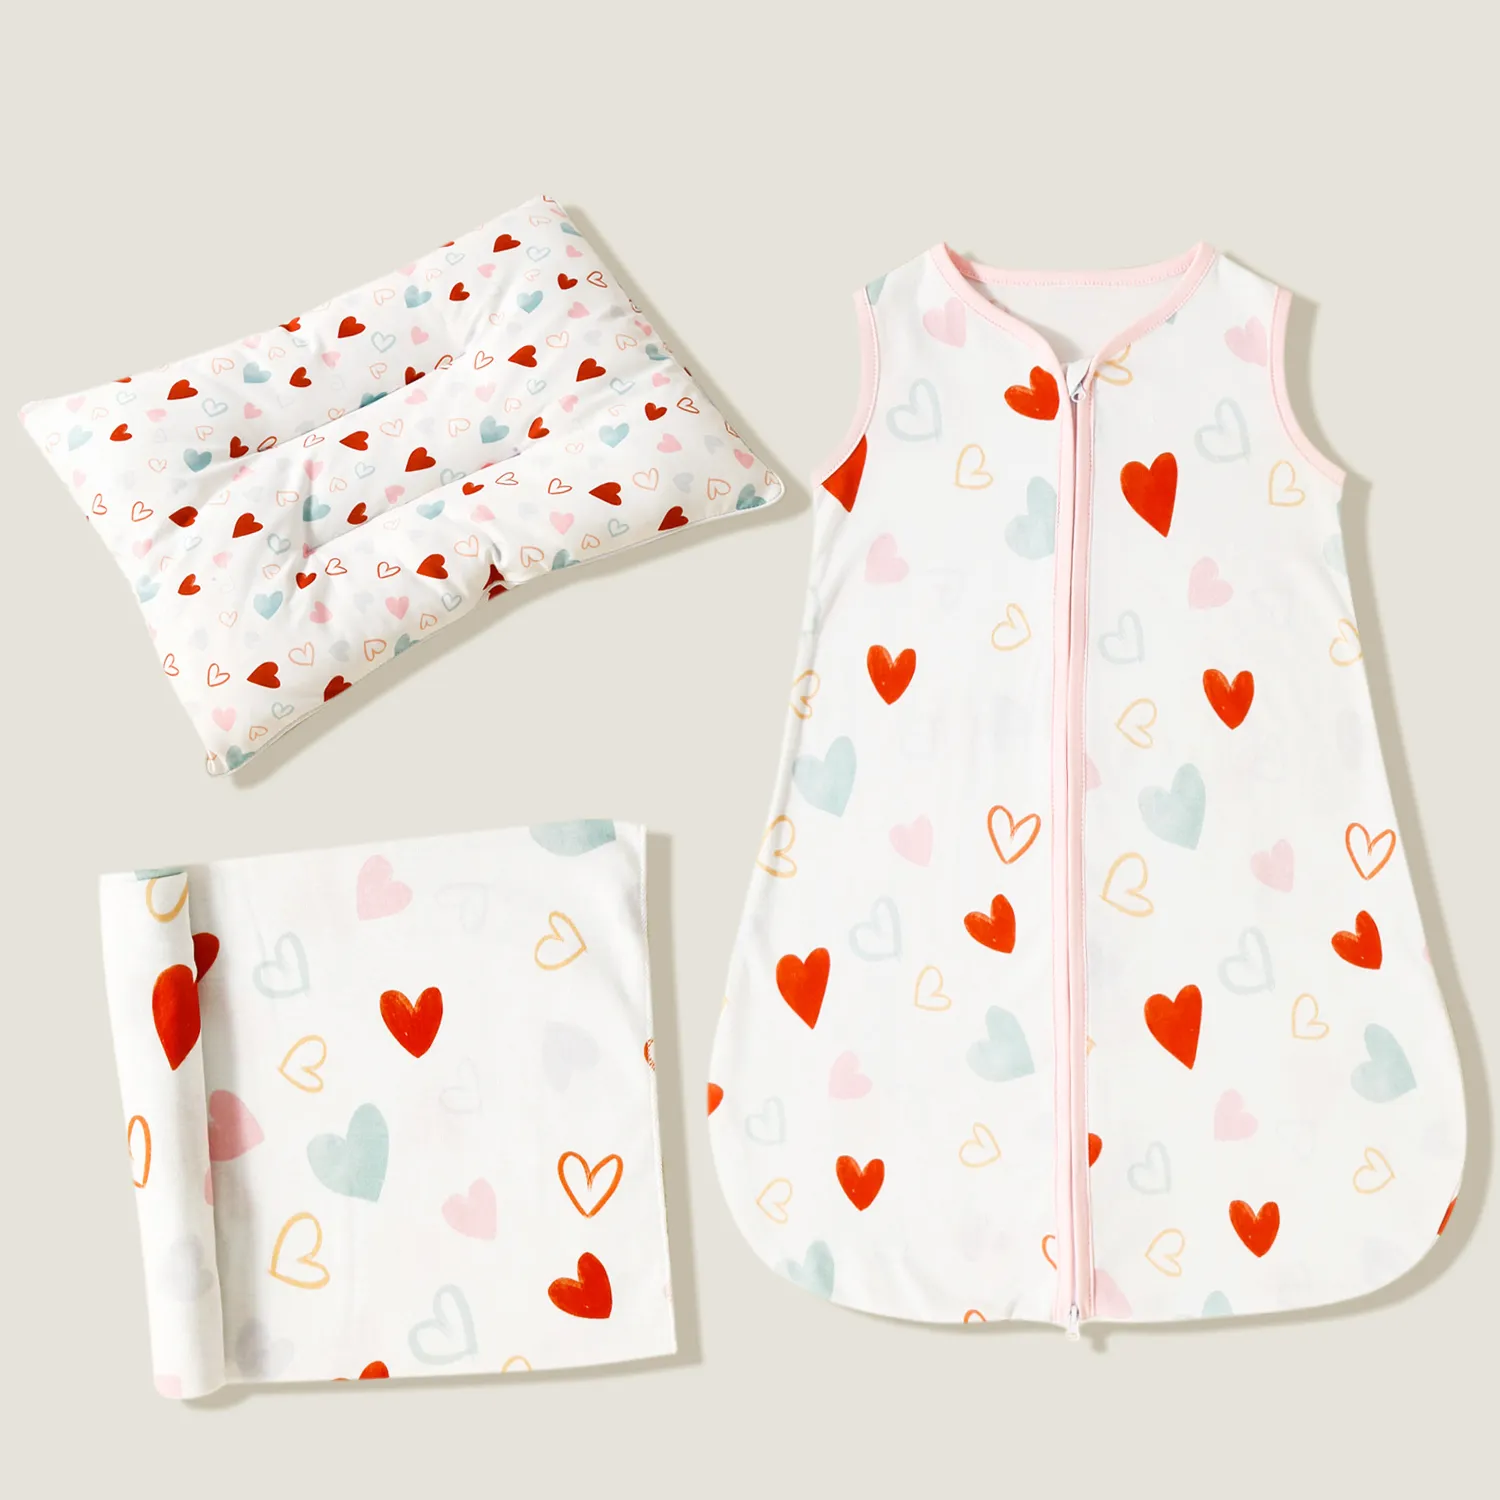 100% Cotton Colorful Heart Print Baby Sleeping Bags / Swaddling Blanket / Pillow